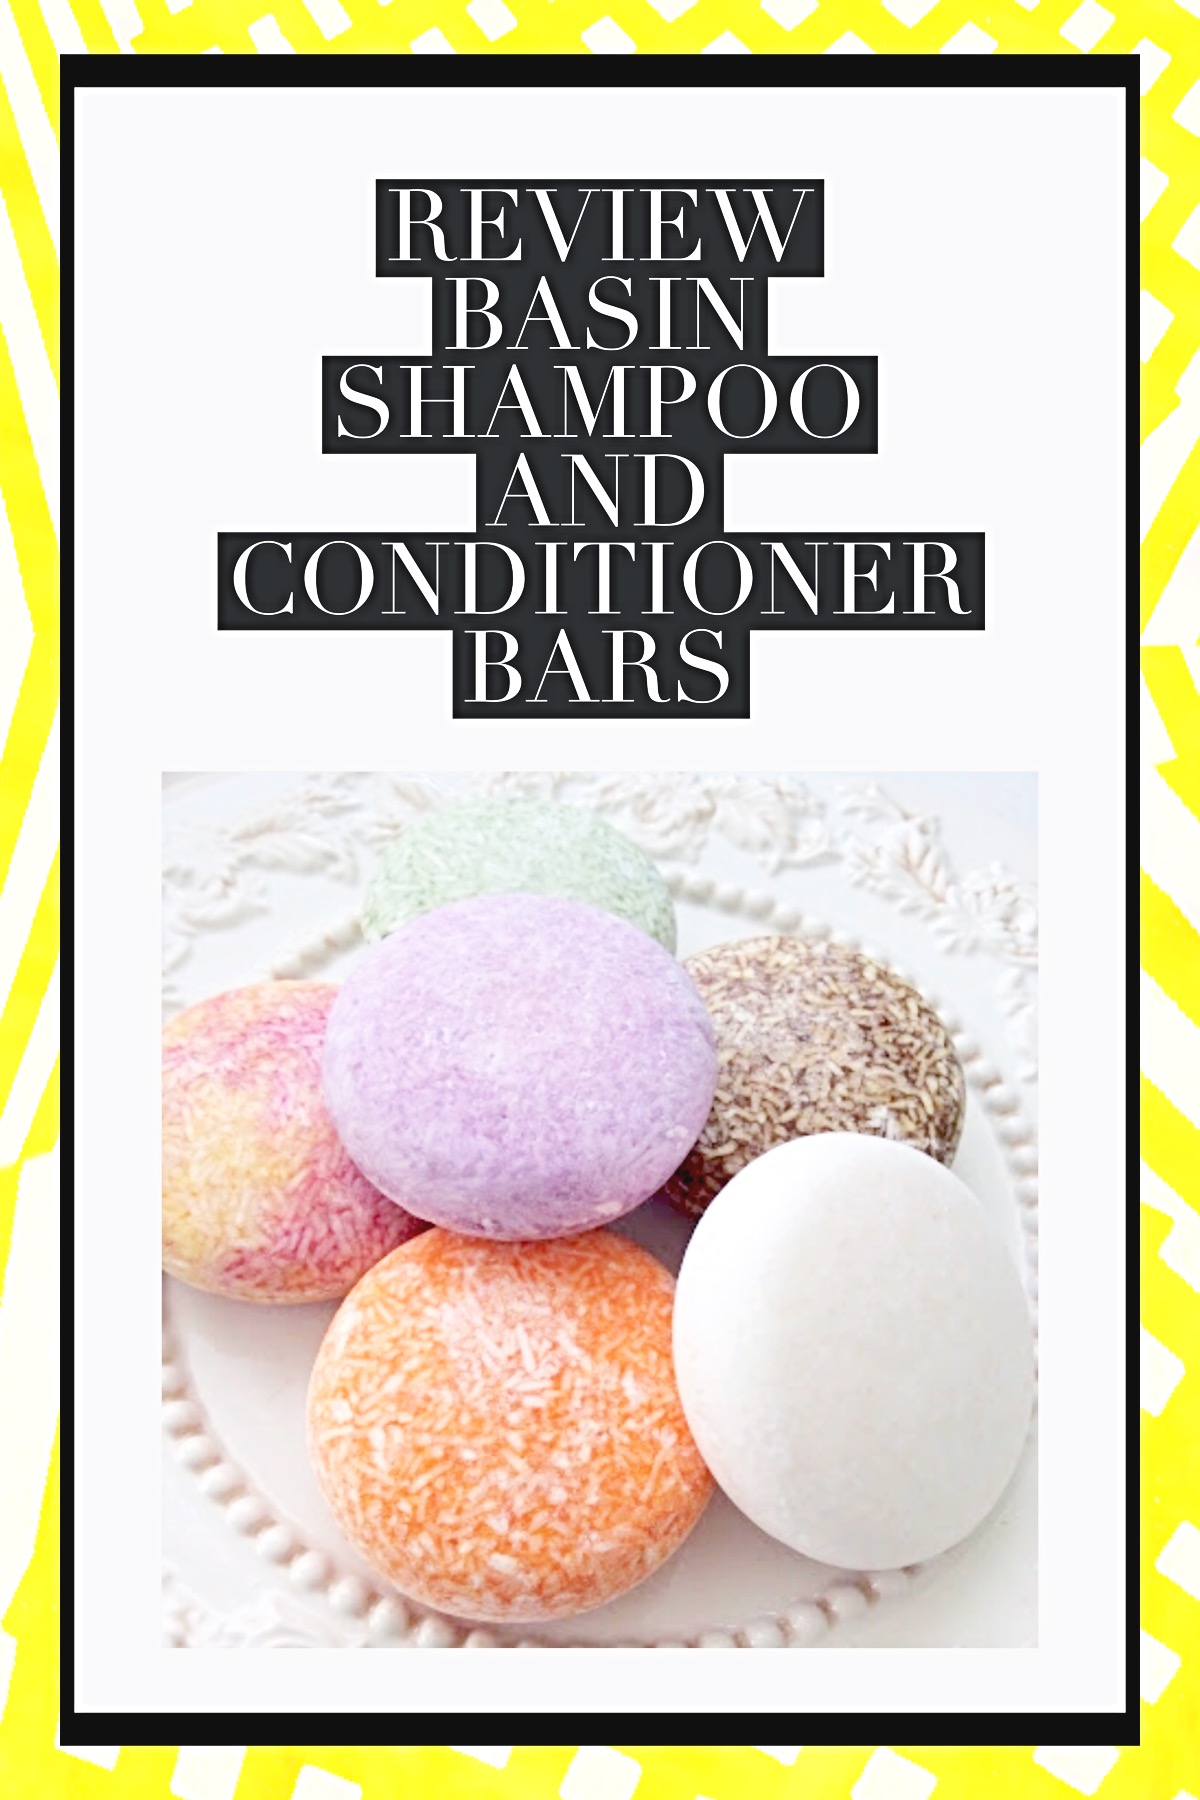 Review Basin Shampoo and Conditioner Bars